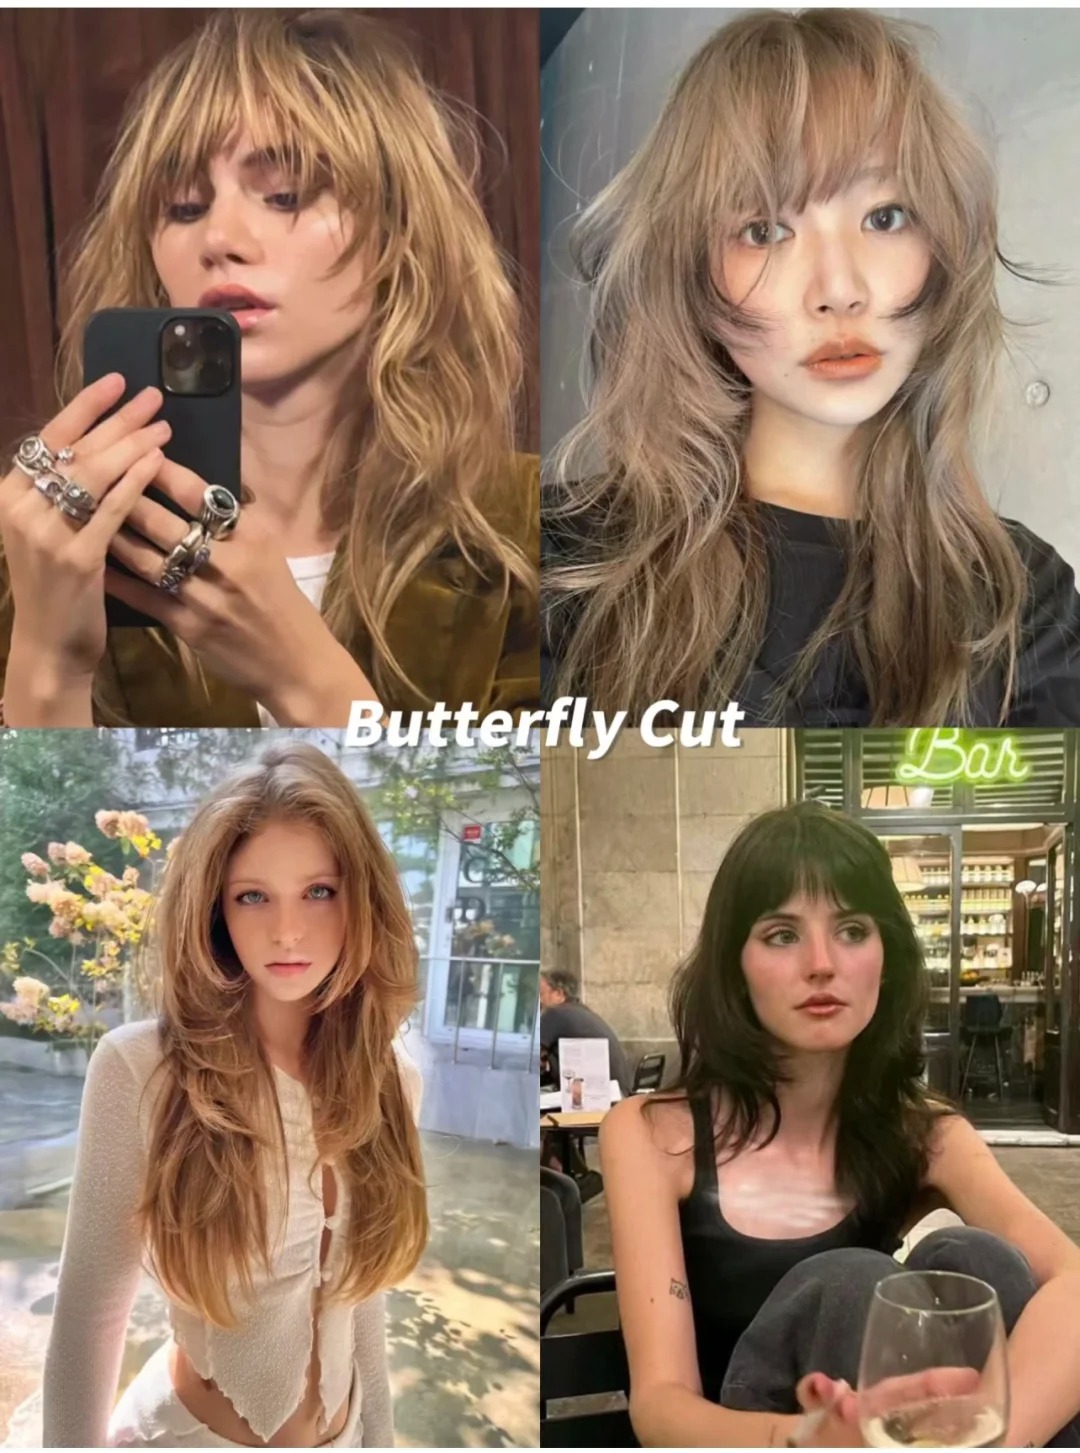 Butterfly Cut hairstyle